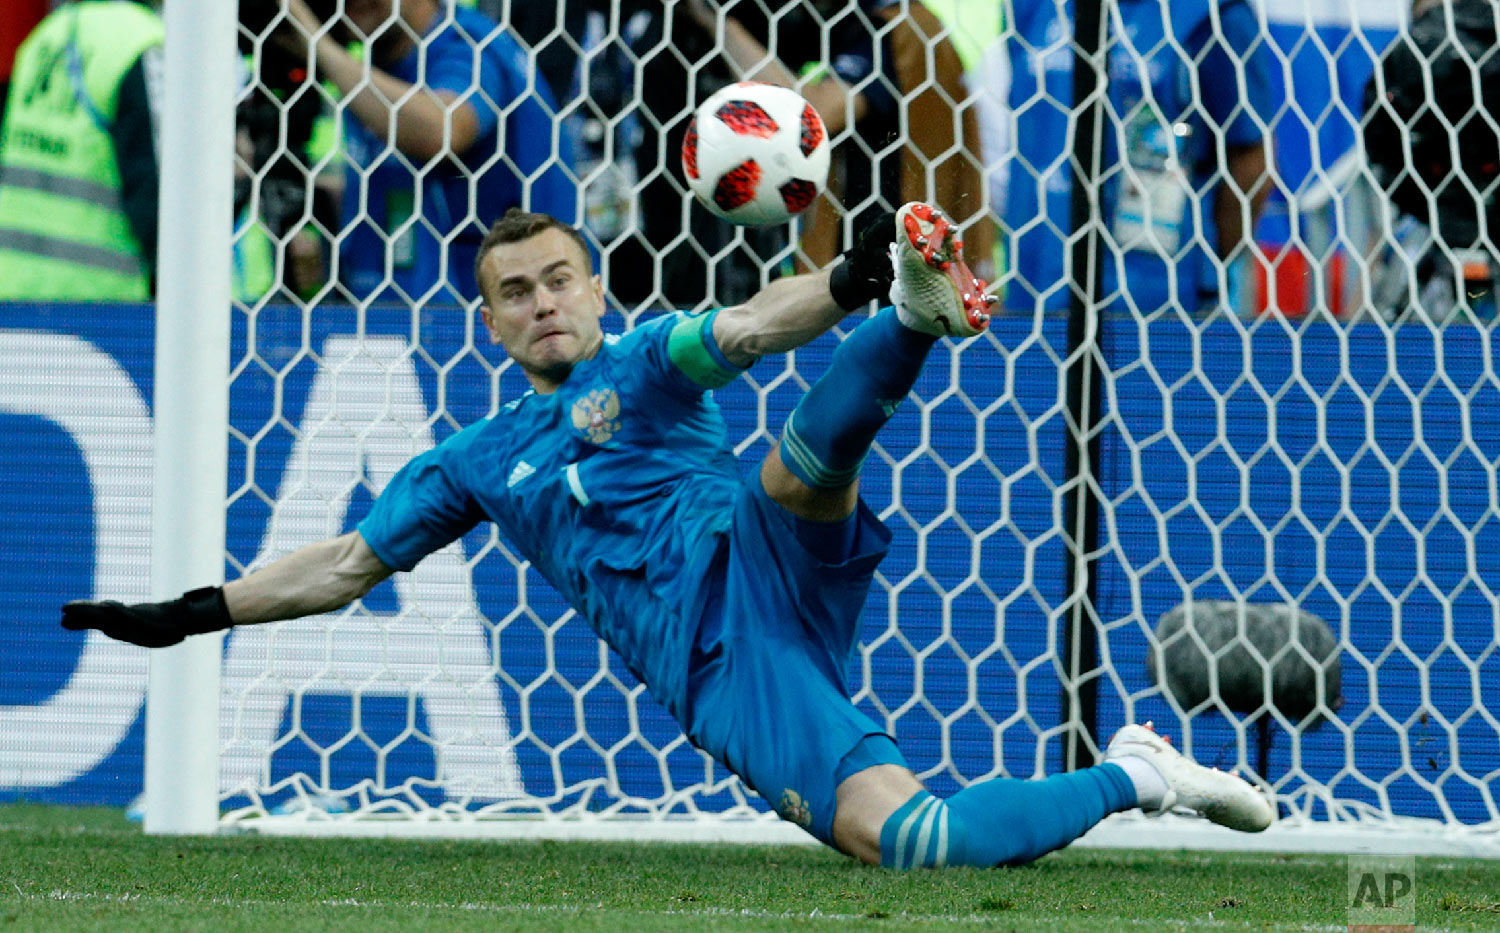  Russia goalkeeper Igor Akinfeev catches a penalty shot during the round of 16 match between Spain and Russia at the 2018 soccer World Cup at the Luzhniki Stadium in Moscow, Russia, Sunday, July 1, 2018. (AP Photo/Victor R. Caivano) 